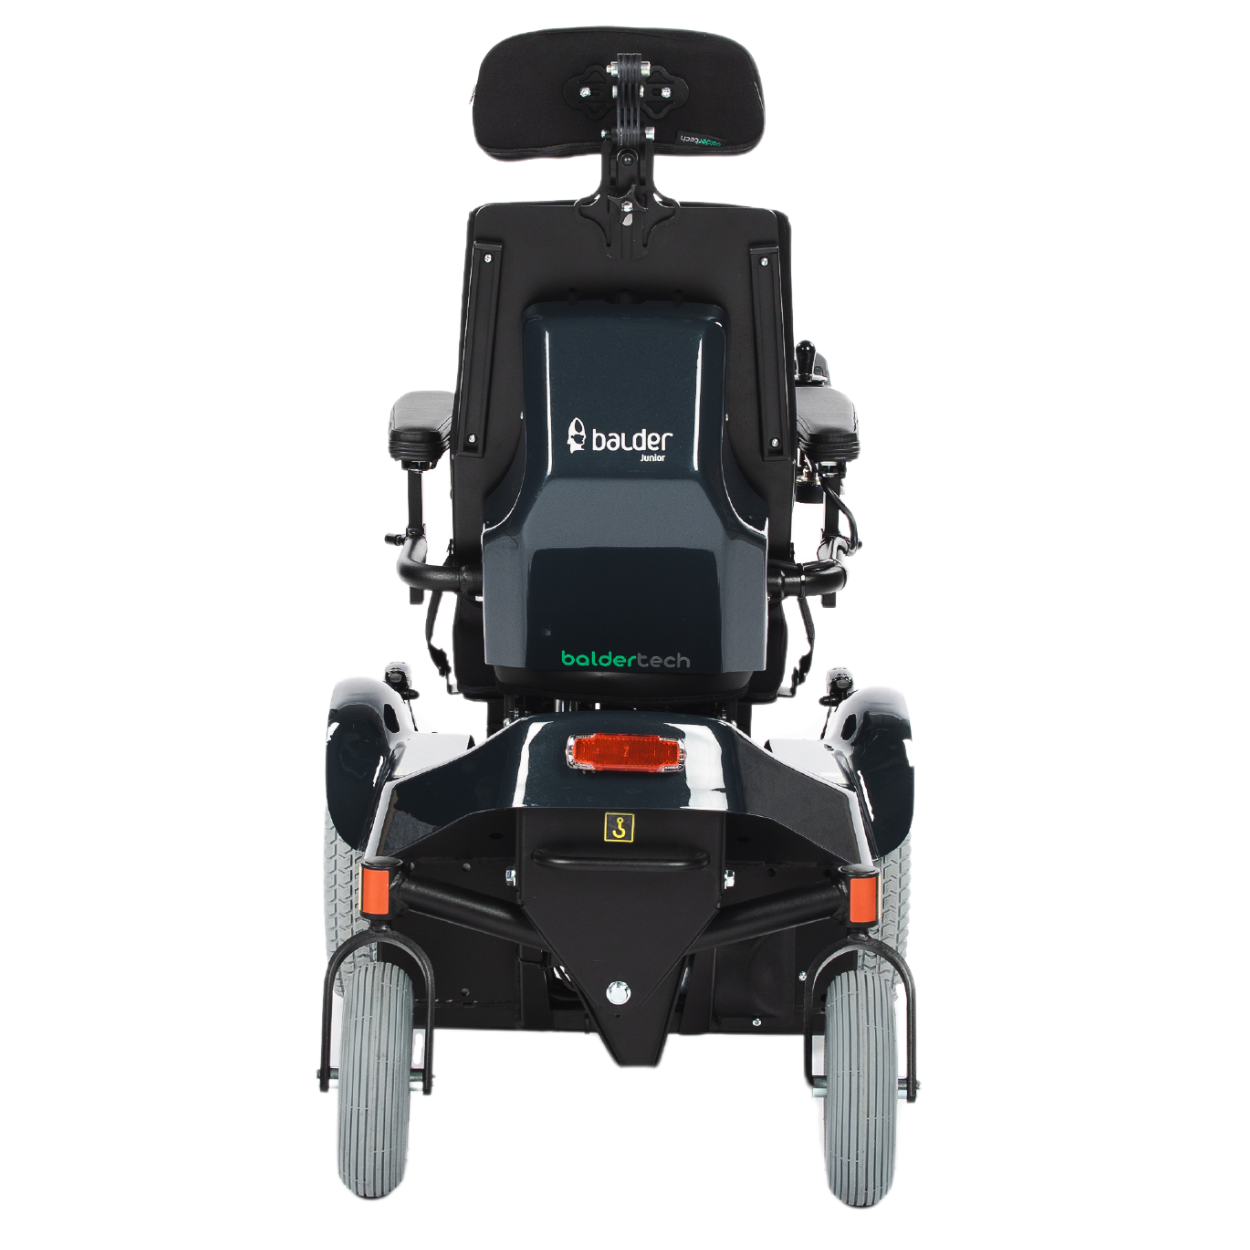 The rear view of a Balder Junior J335 childrens powerchair in a seated position.